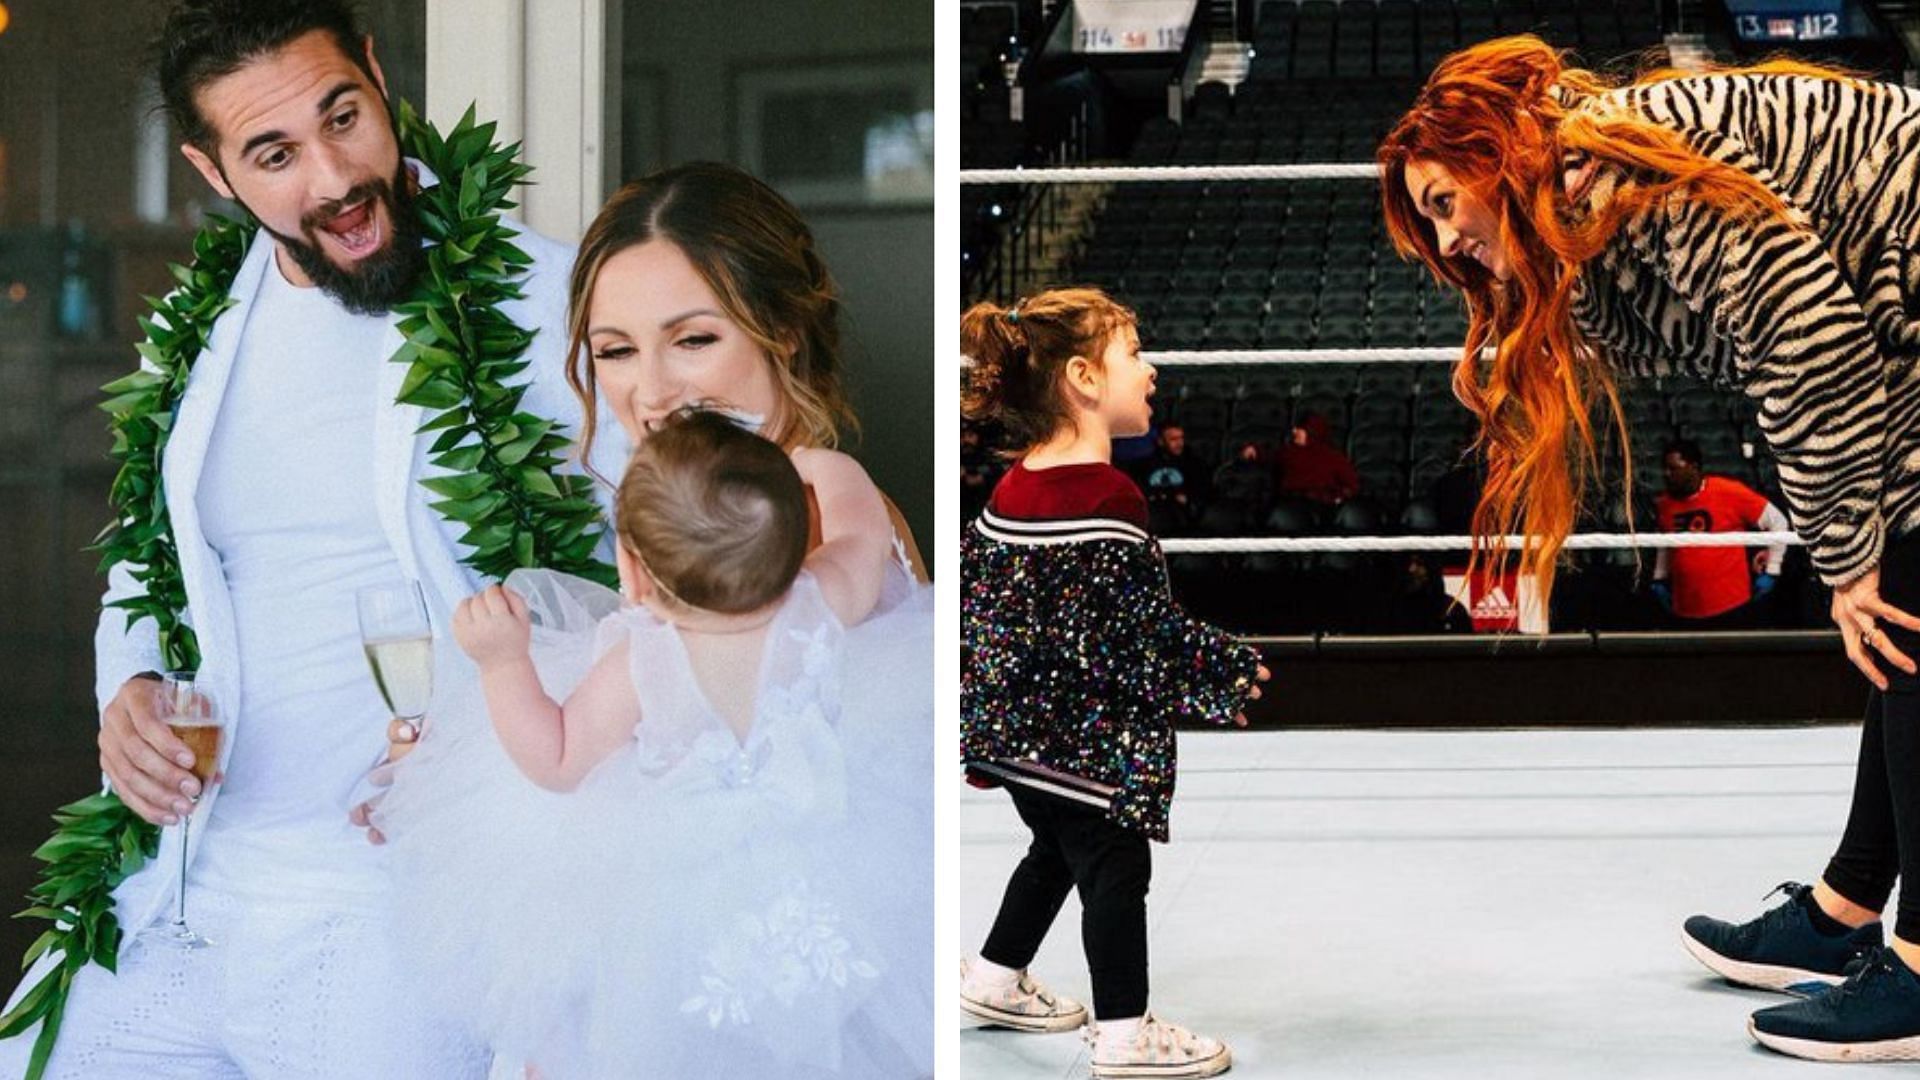 Becky Lynch Daughter: Why did Becky Lynch used to hide her